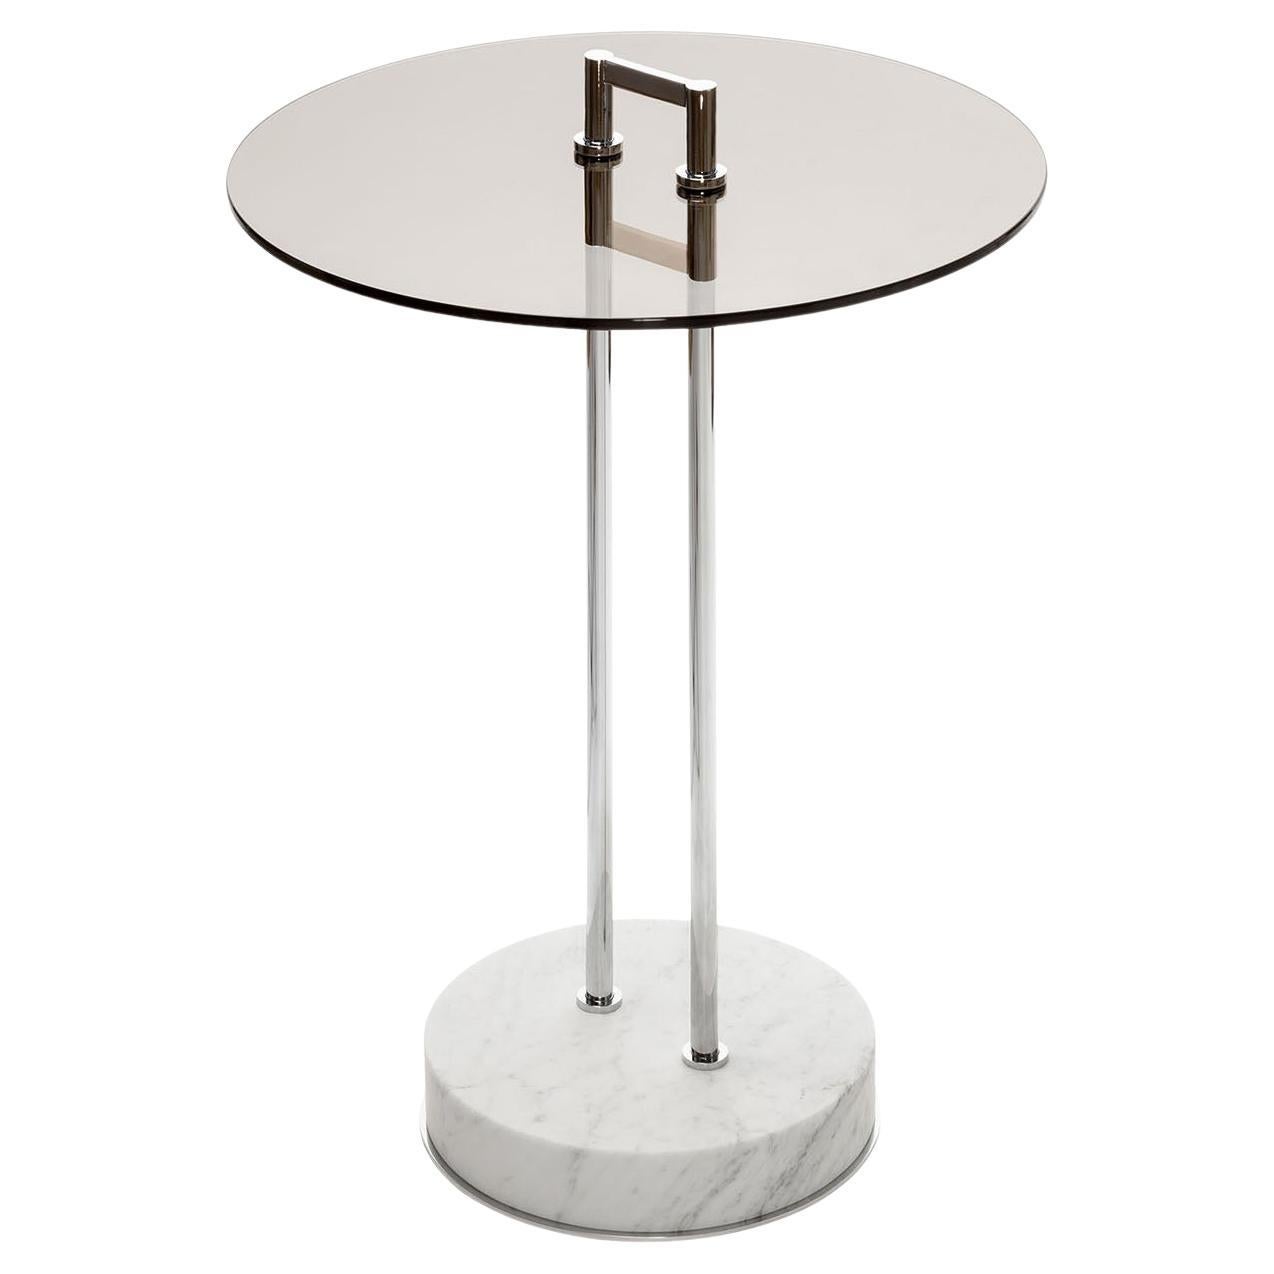 Urbino Marble Occasional Table #1 For Sale